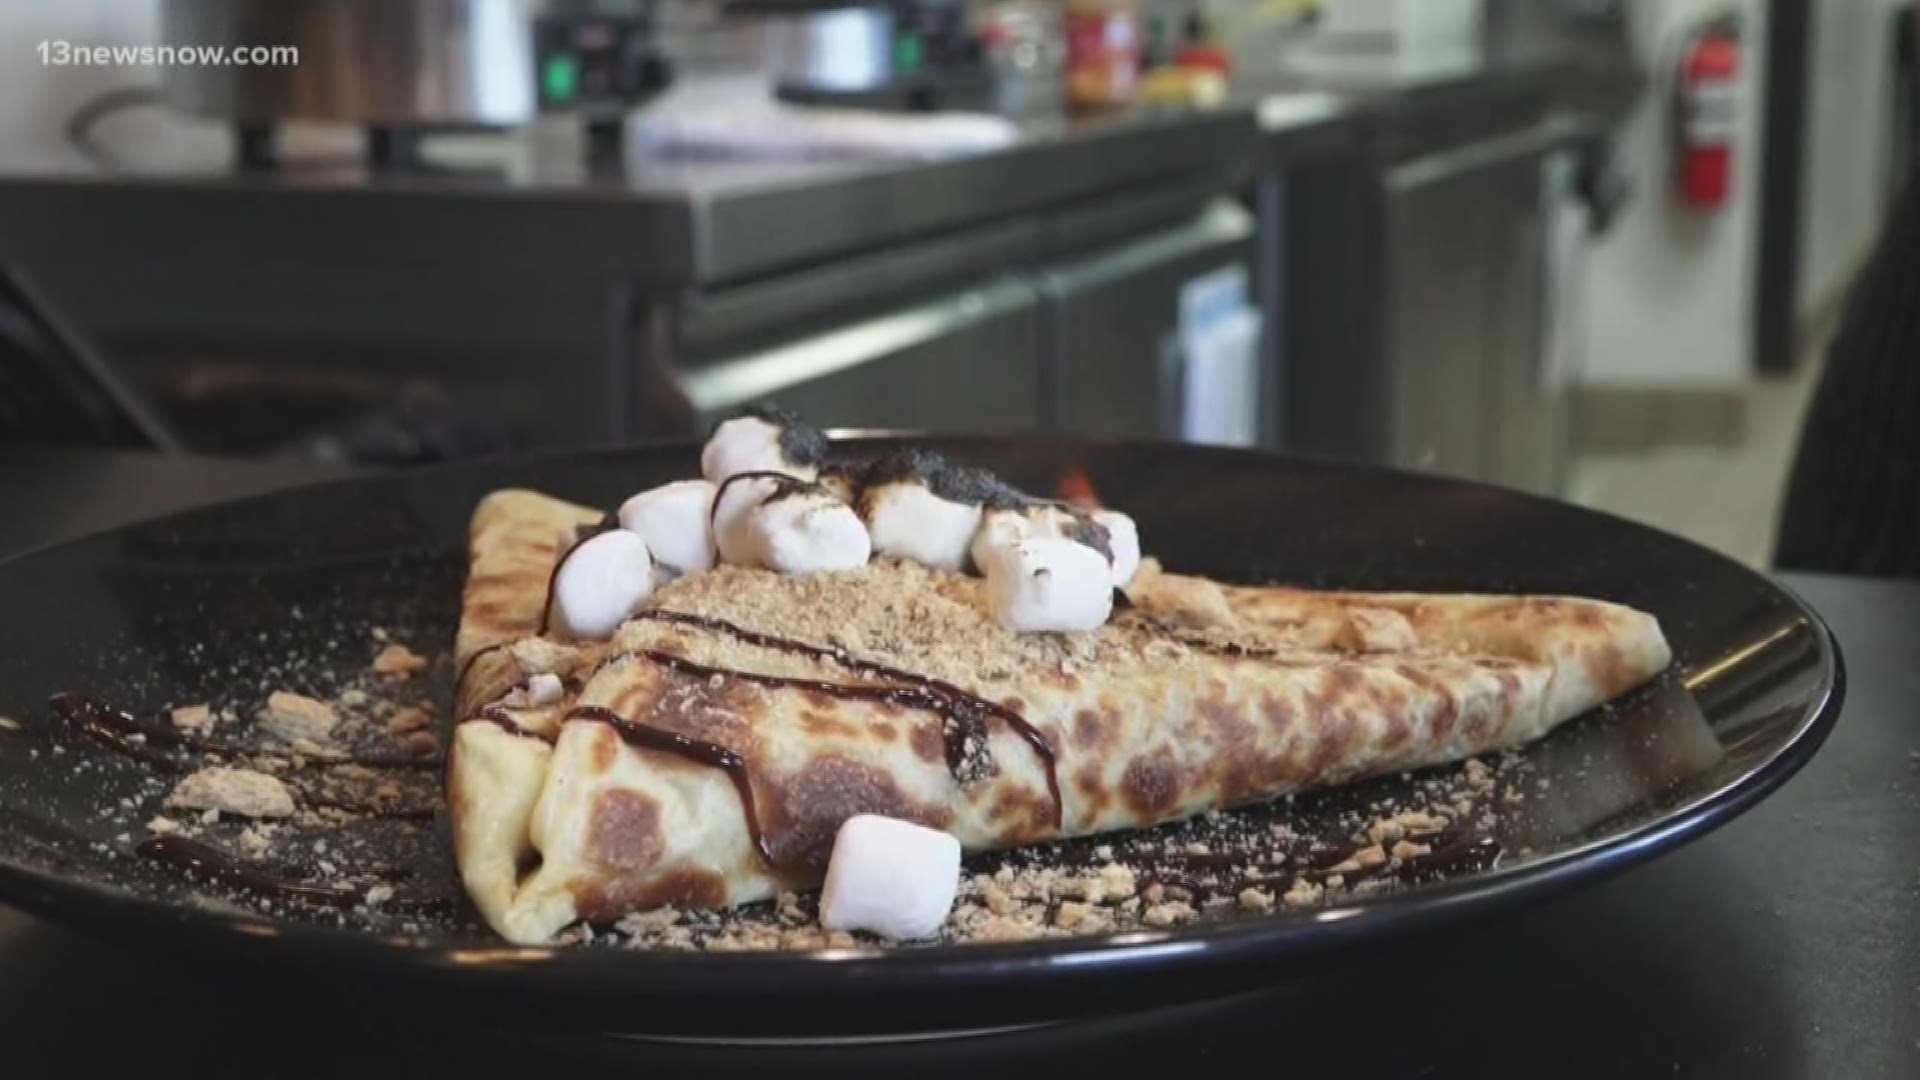 Lamia's Crepes has two locations in Norfolk and Virginia Beach's Town Center.